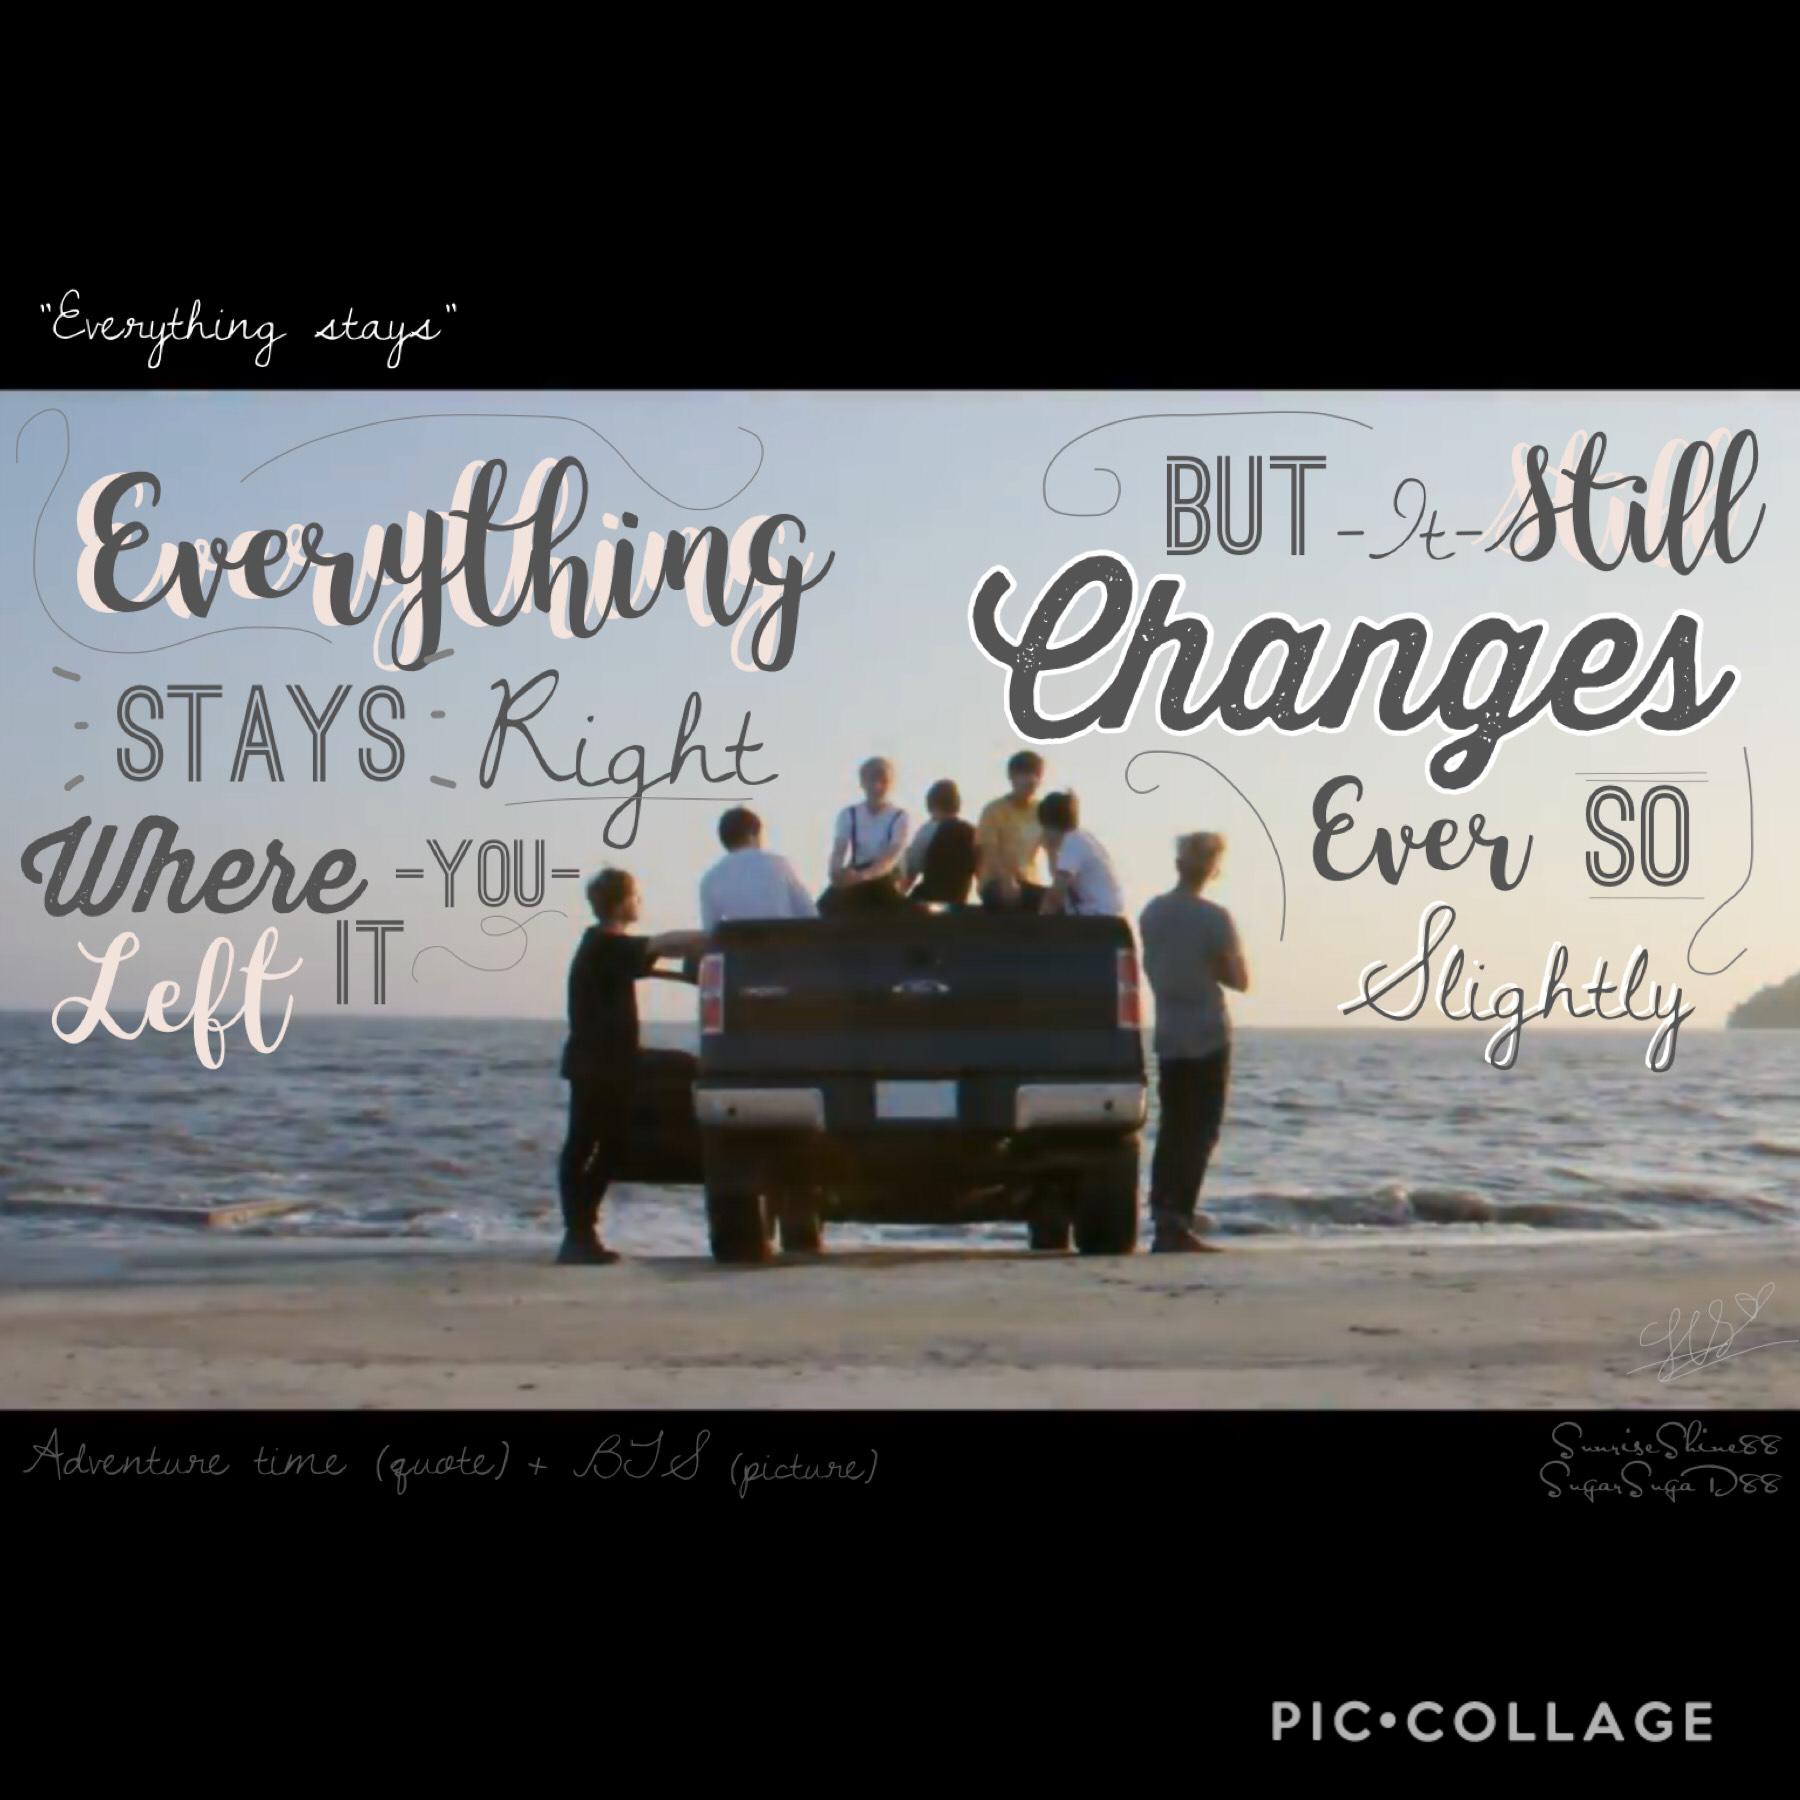 Lyrics from:
“Everything Stays” from Adventure Time.

Picture: BTS (kpop) 

I was bored so I decided to do this.

I think the lyrics of the song suited BTS (becuz yeah... they’re changing, but they’re still our boys). 

Adventure time just ended and even 